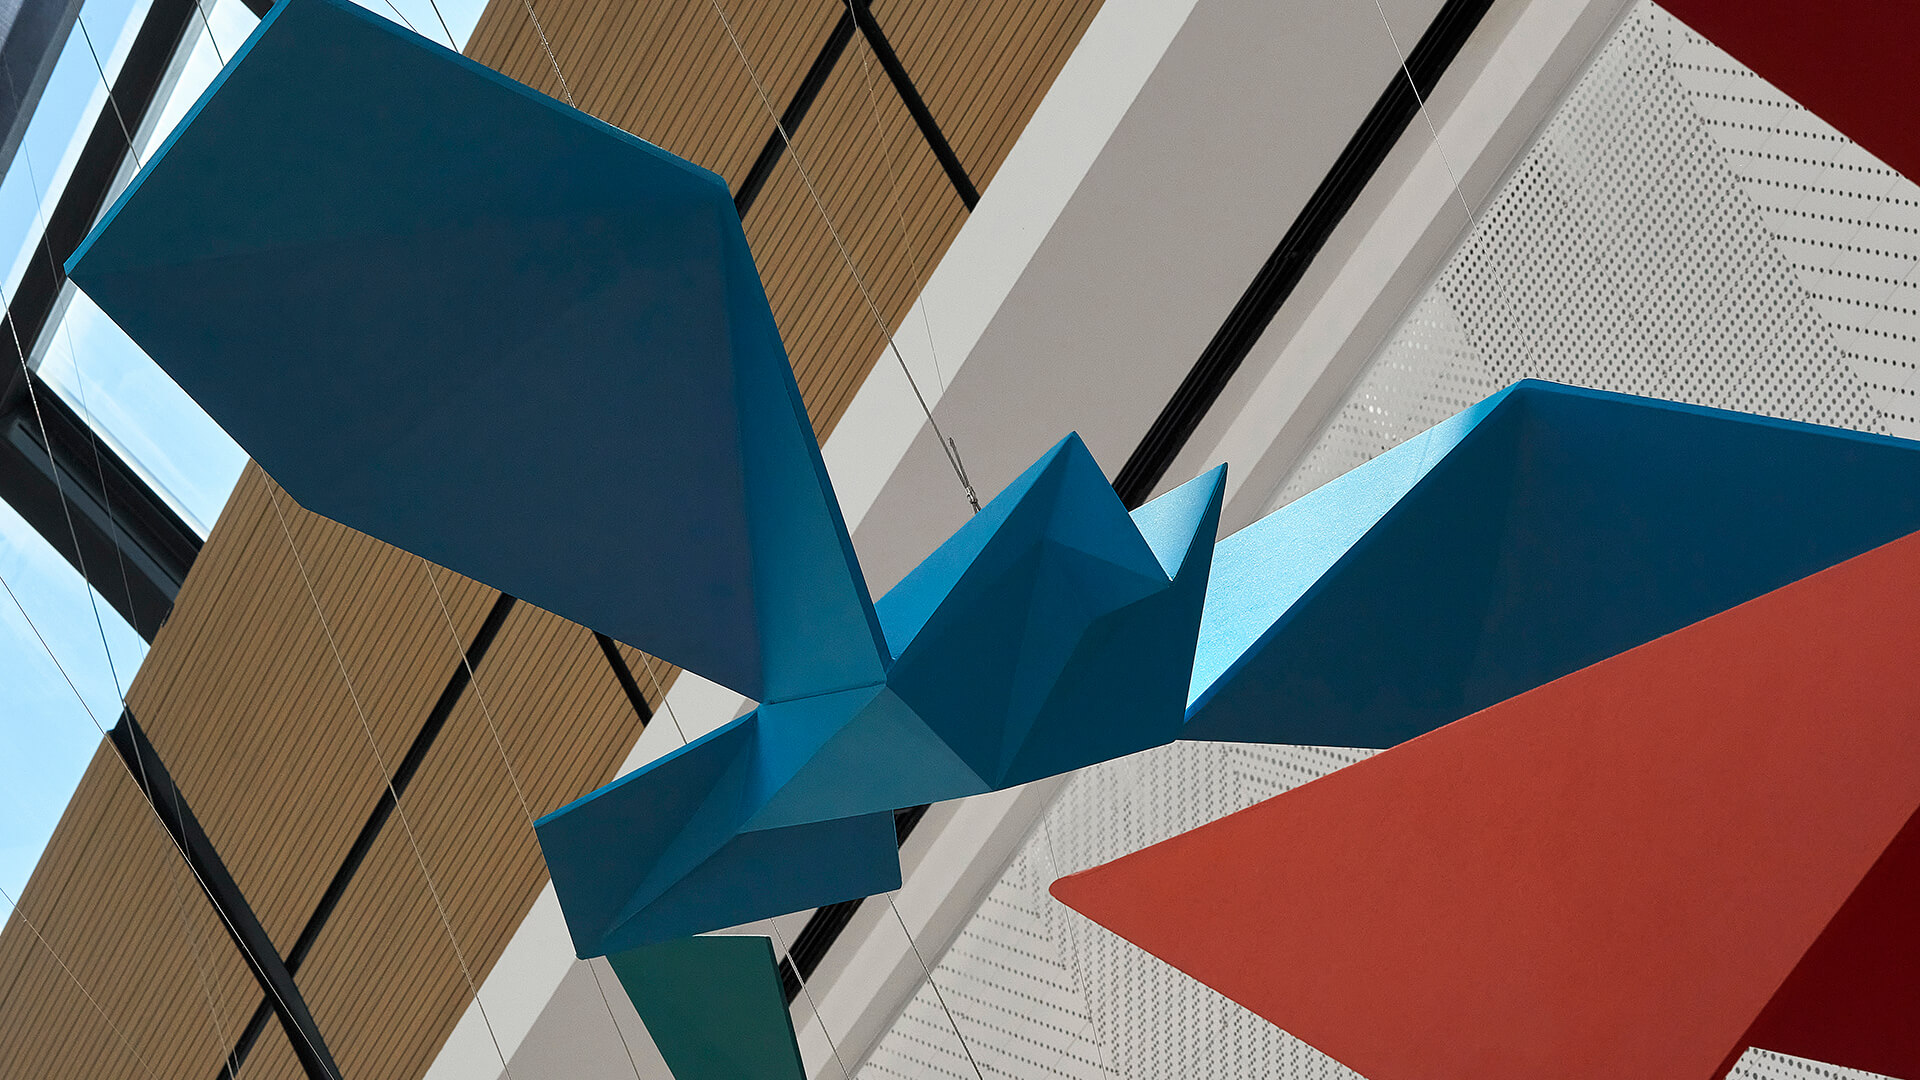 a VANDAL experiential brand activation featuring a close up of giant origami birds